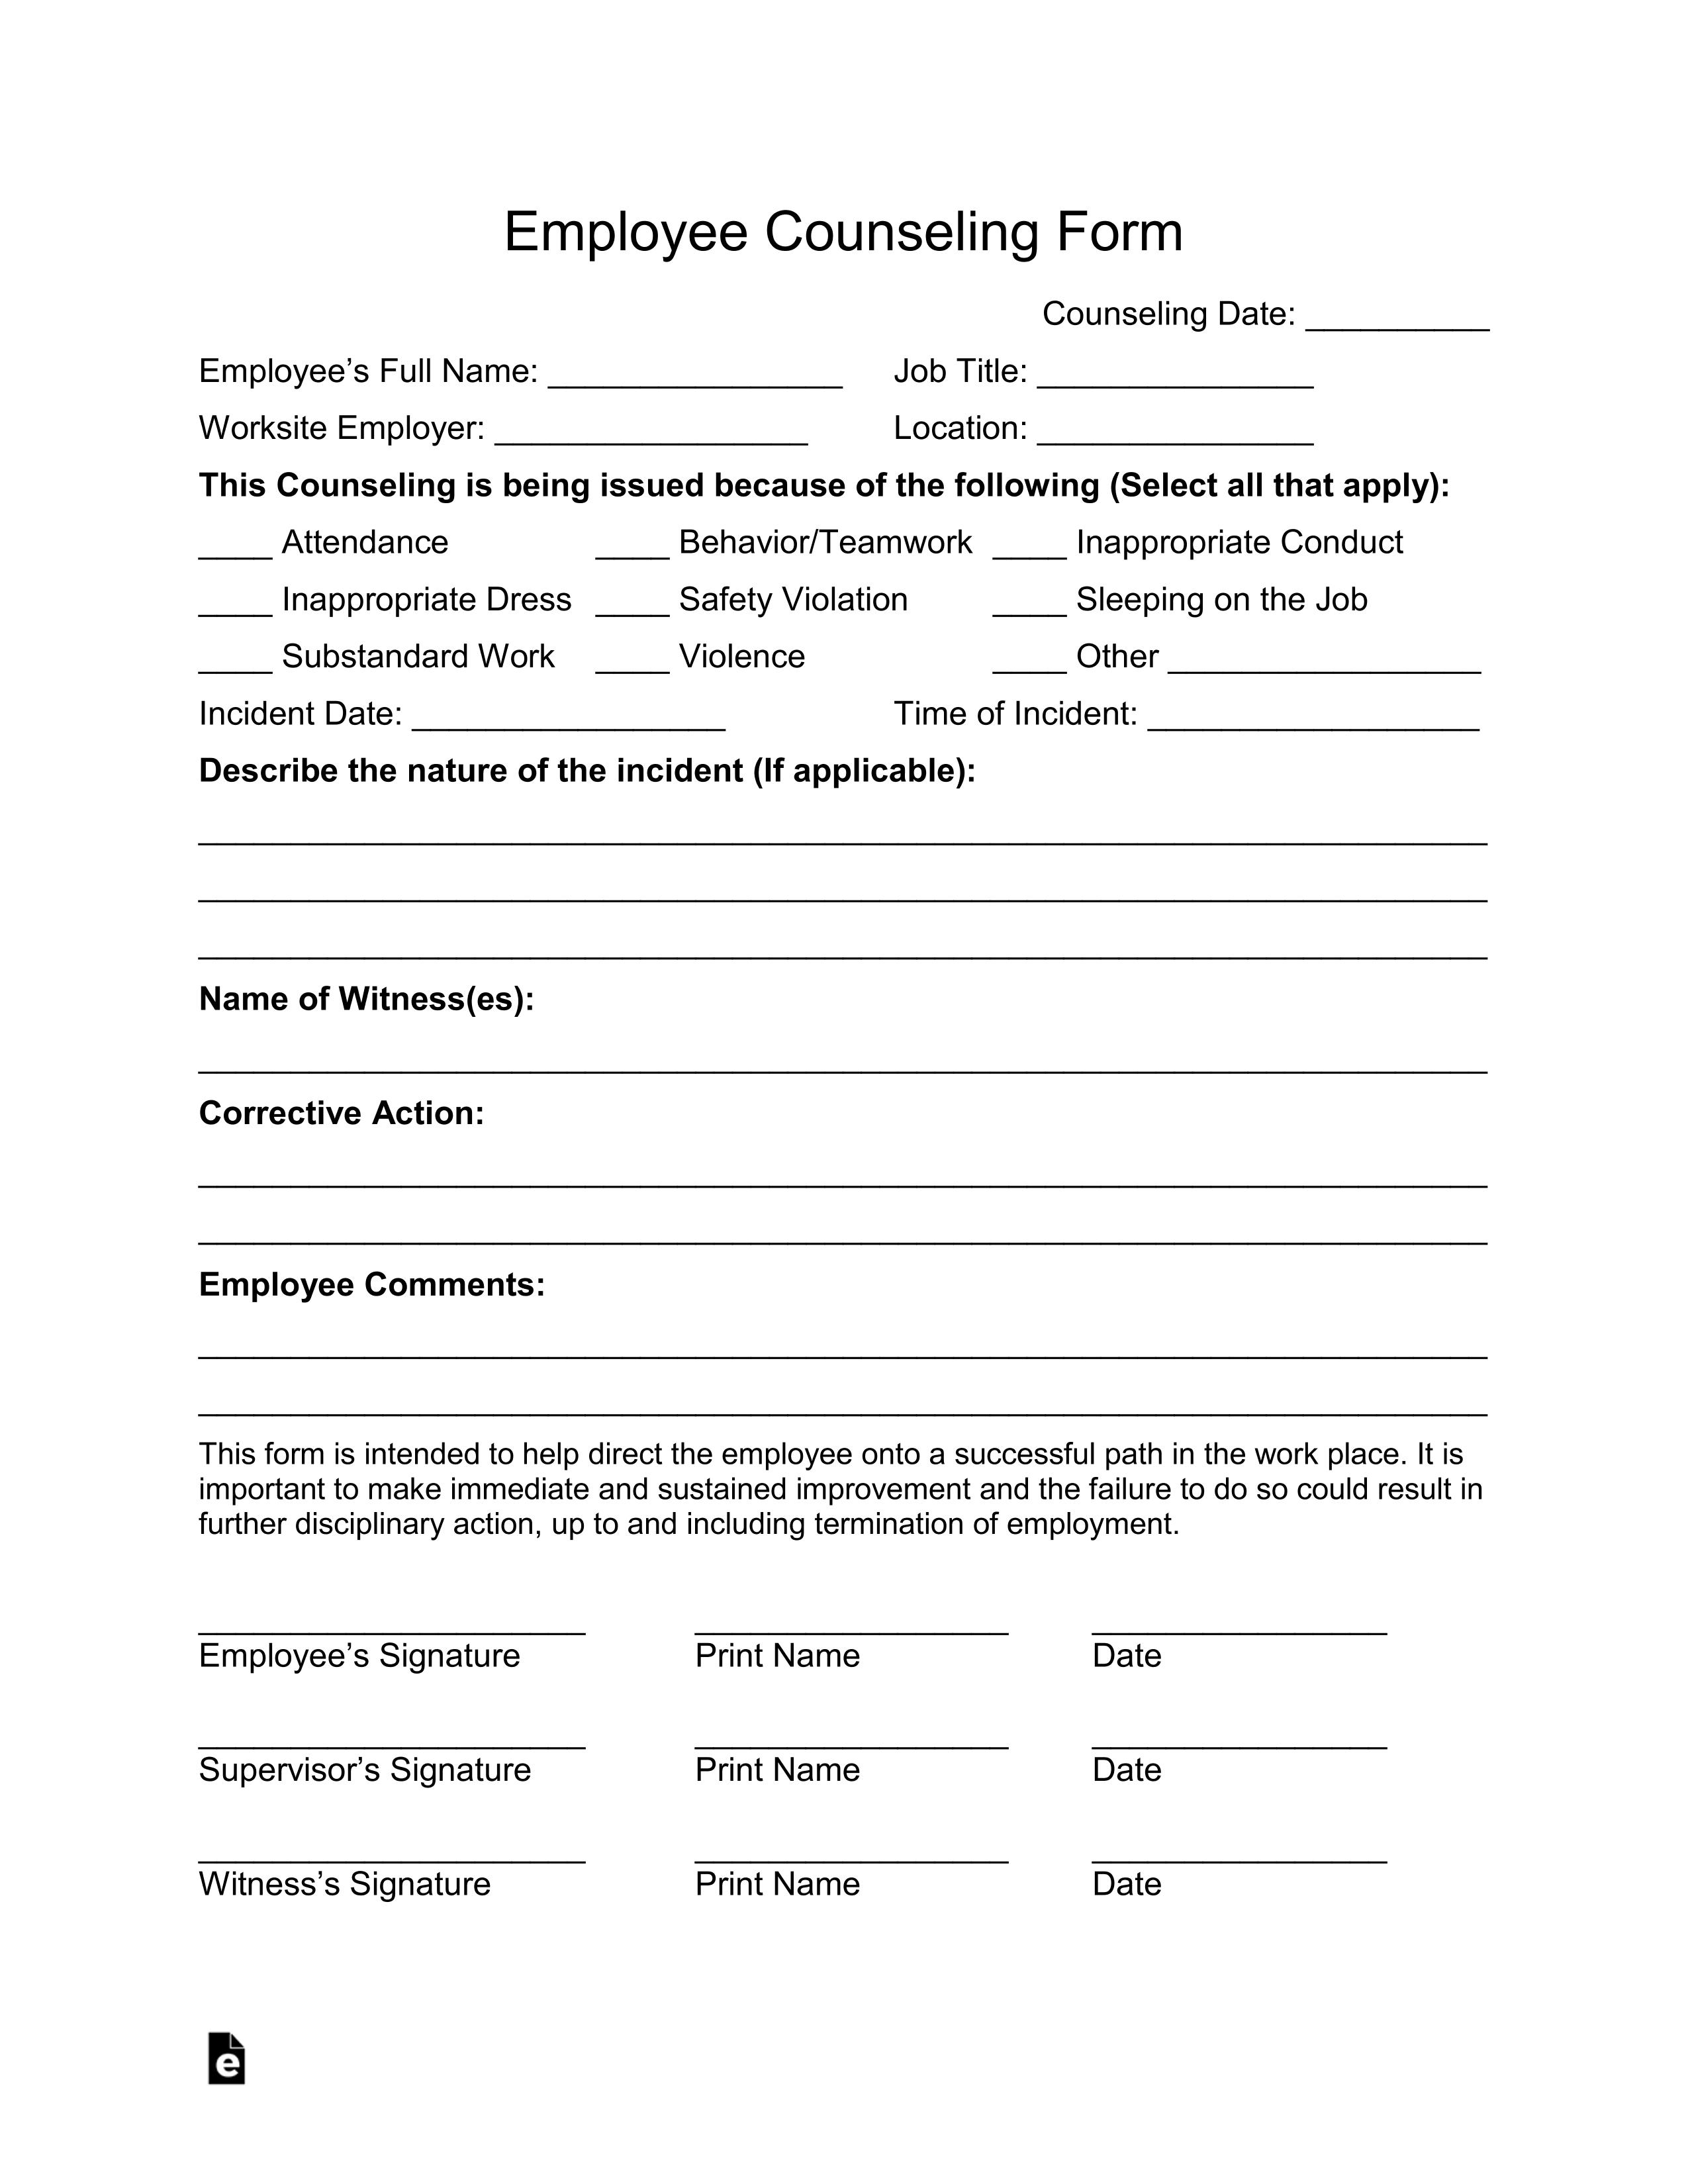 Employee Counseling Forms